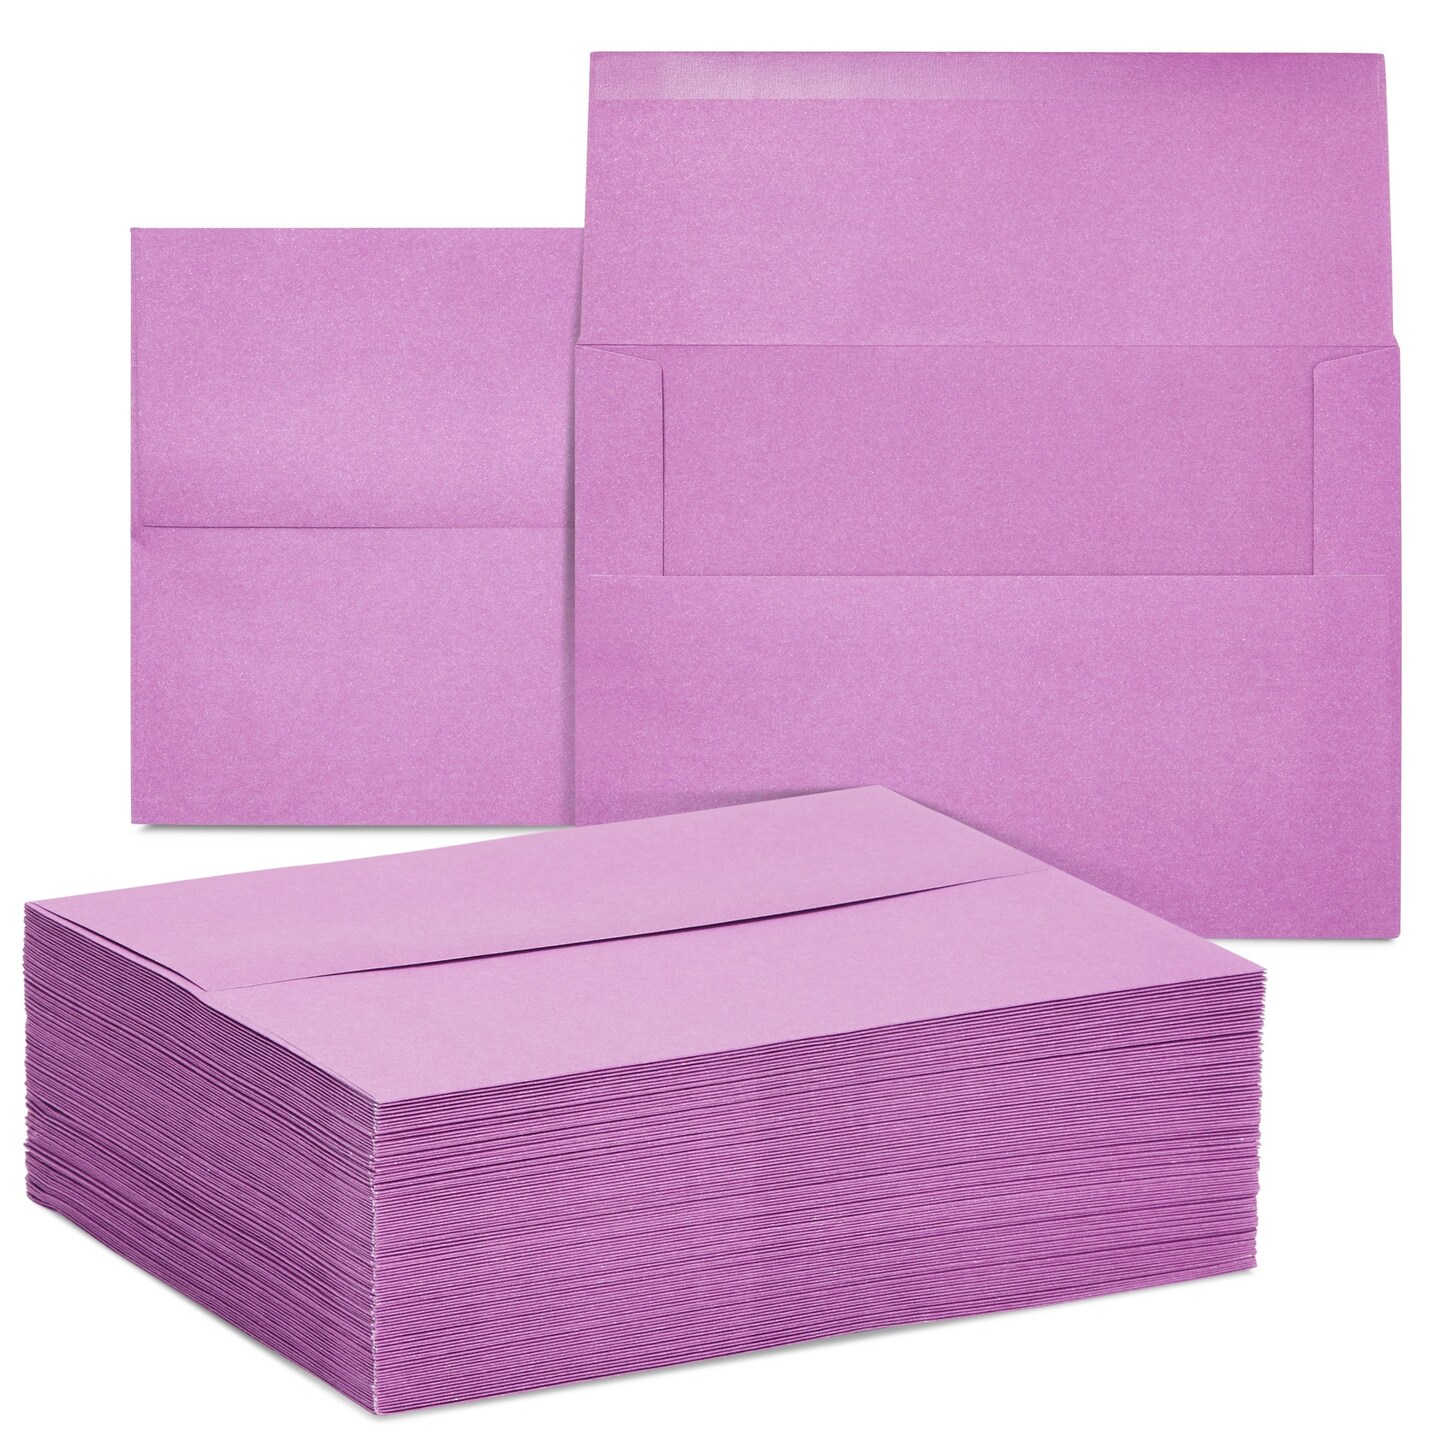 100 Pack Purple Envelopes 5x7, A7 Size for Greeting Cards, Mailing, Wedding Invitations